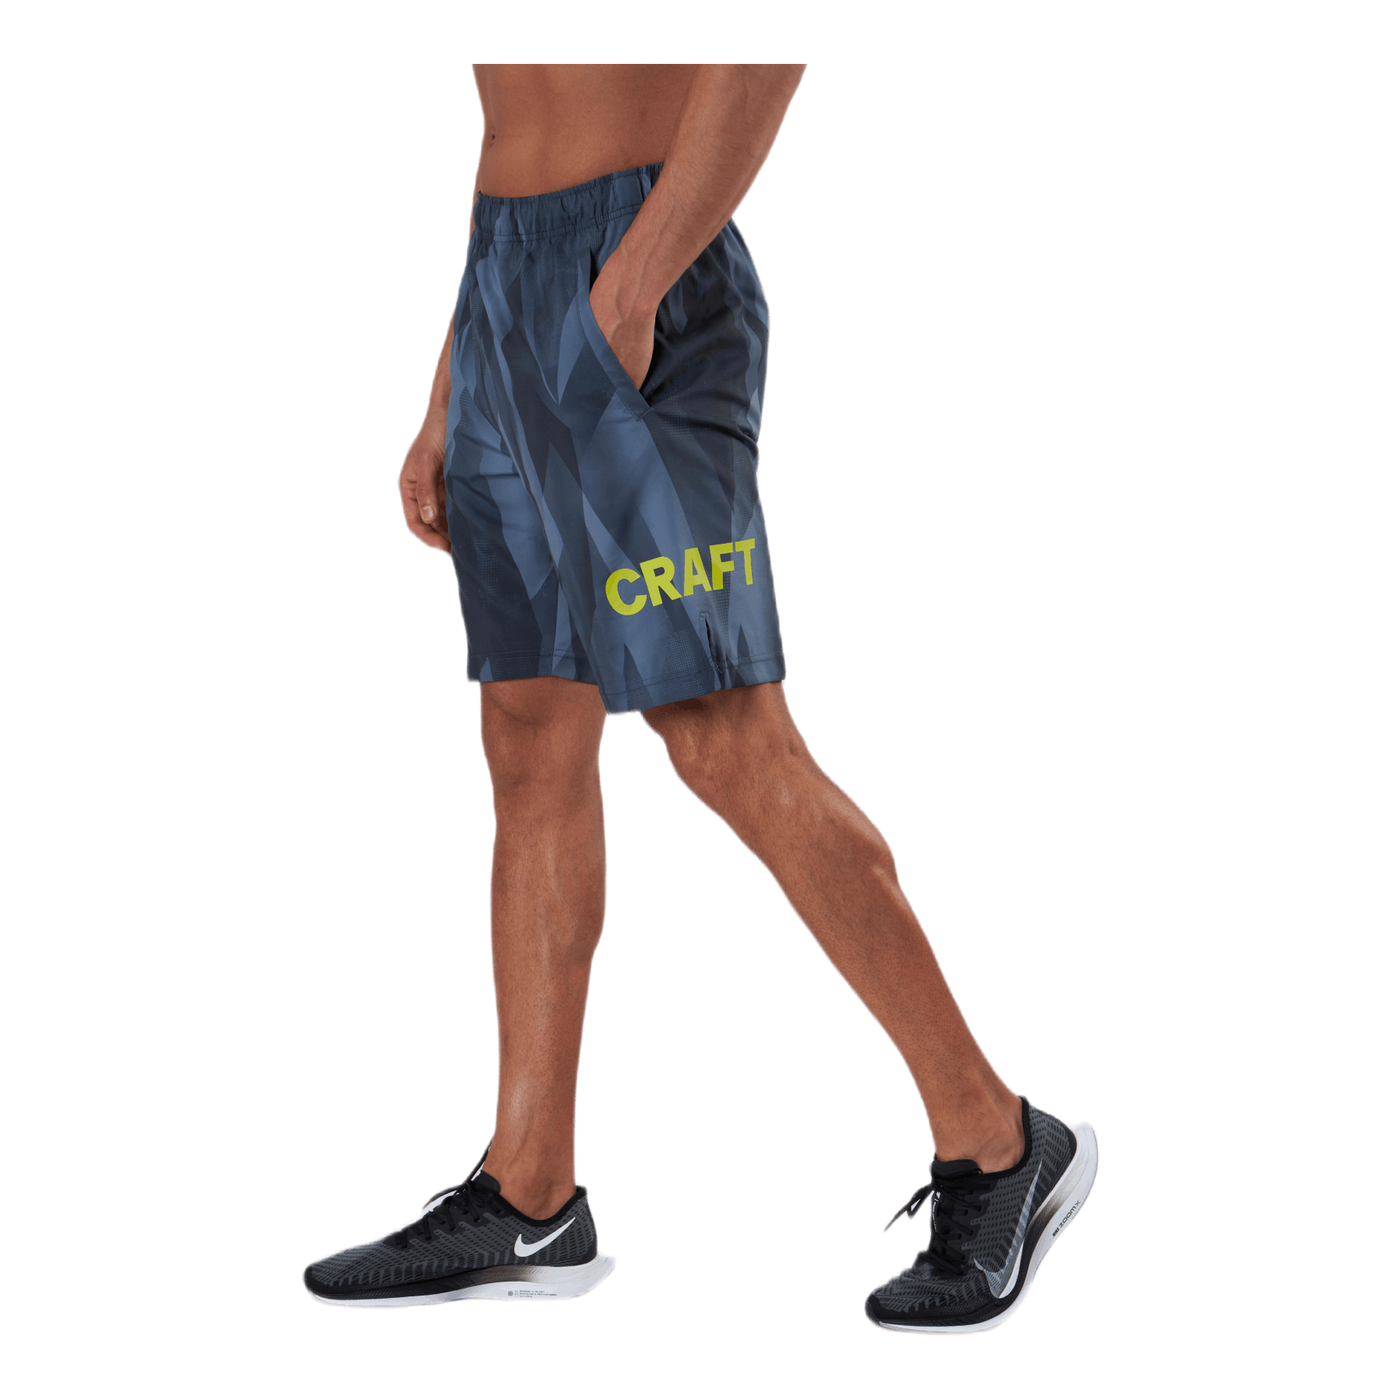 Core Charge Shorts Patterned